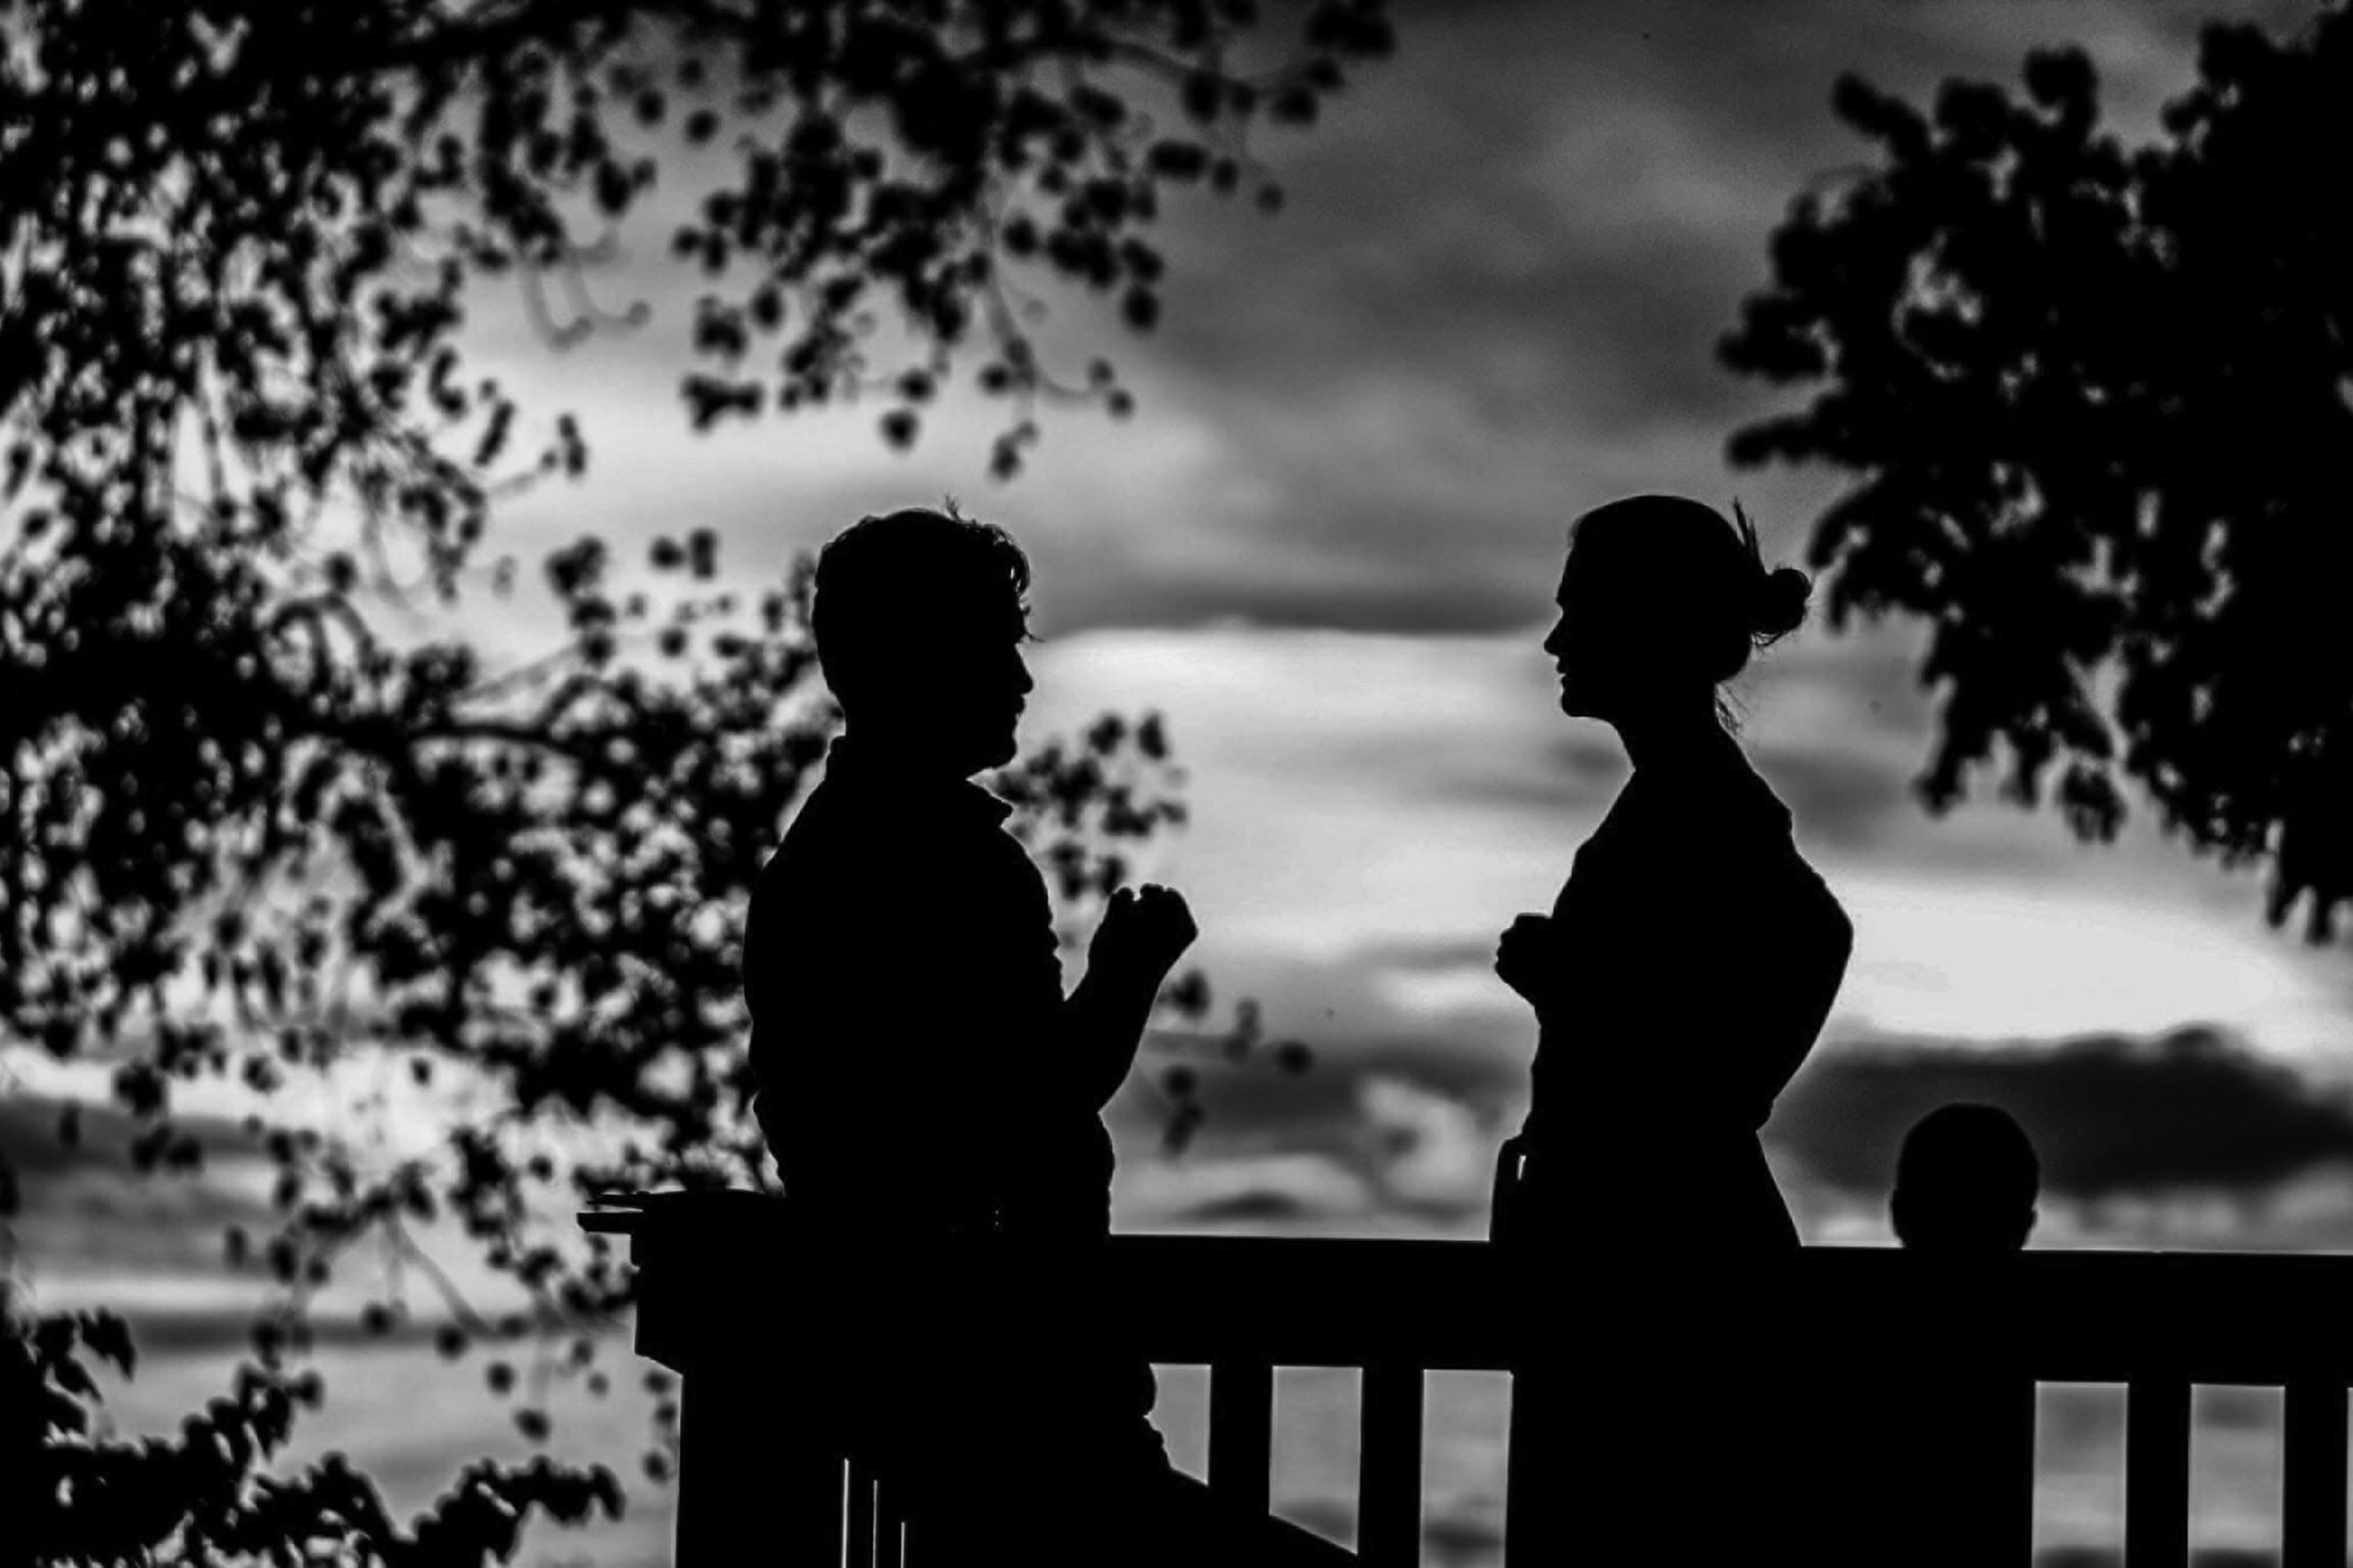 A man and a woman face each other as they stand and talk near a railing. They are darkened silhouettes and tree branches peek in from both sides of the image.